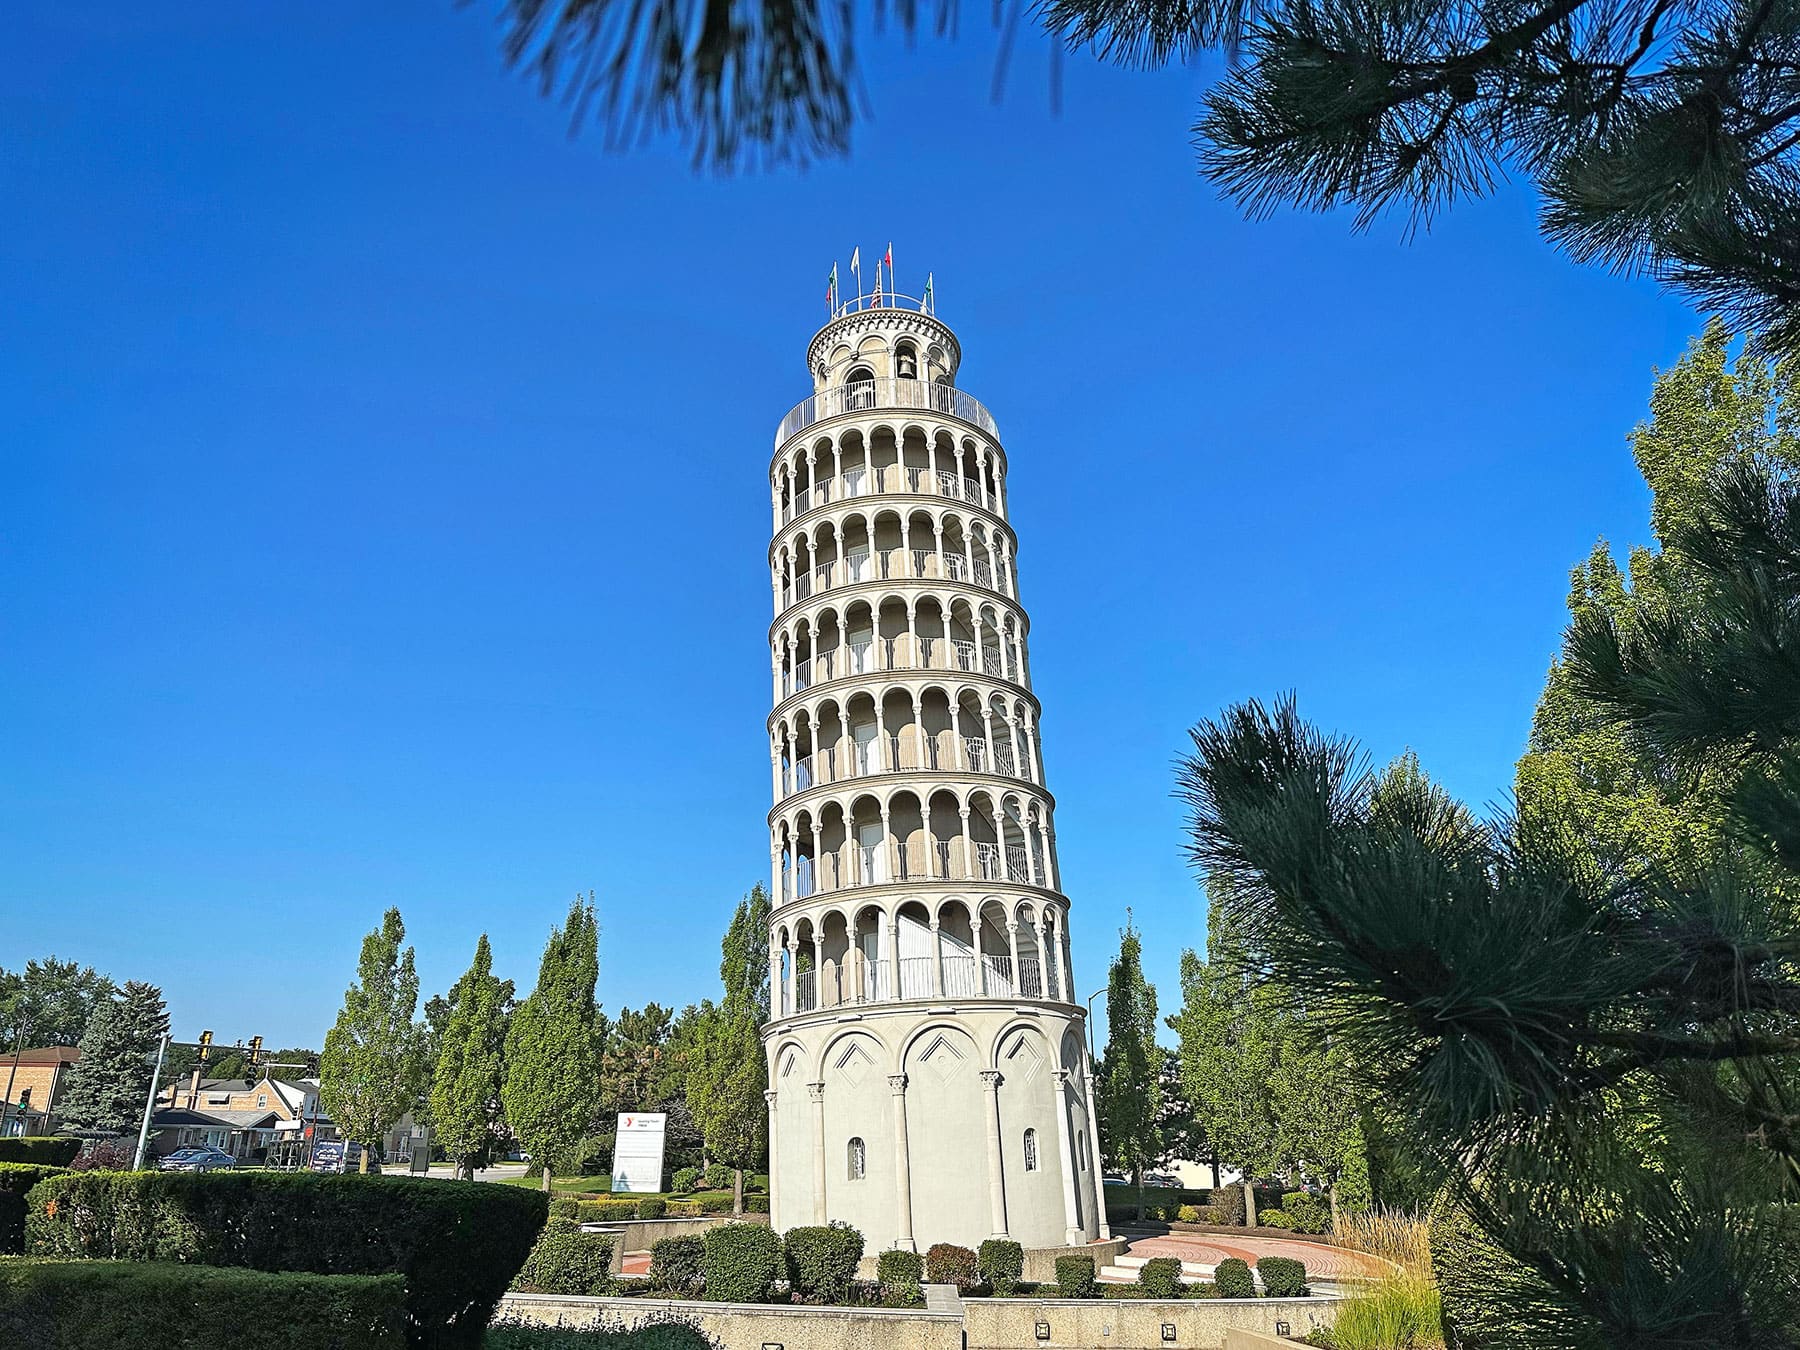 Stylized picture of the The Leaning Tower of Niles